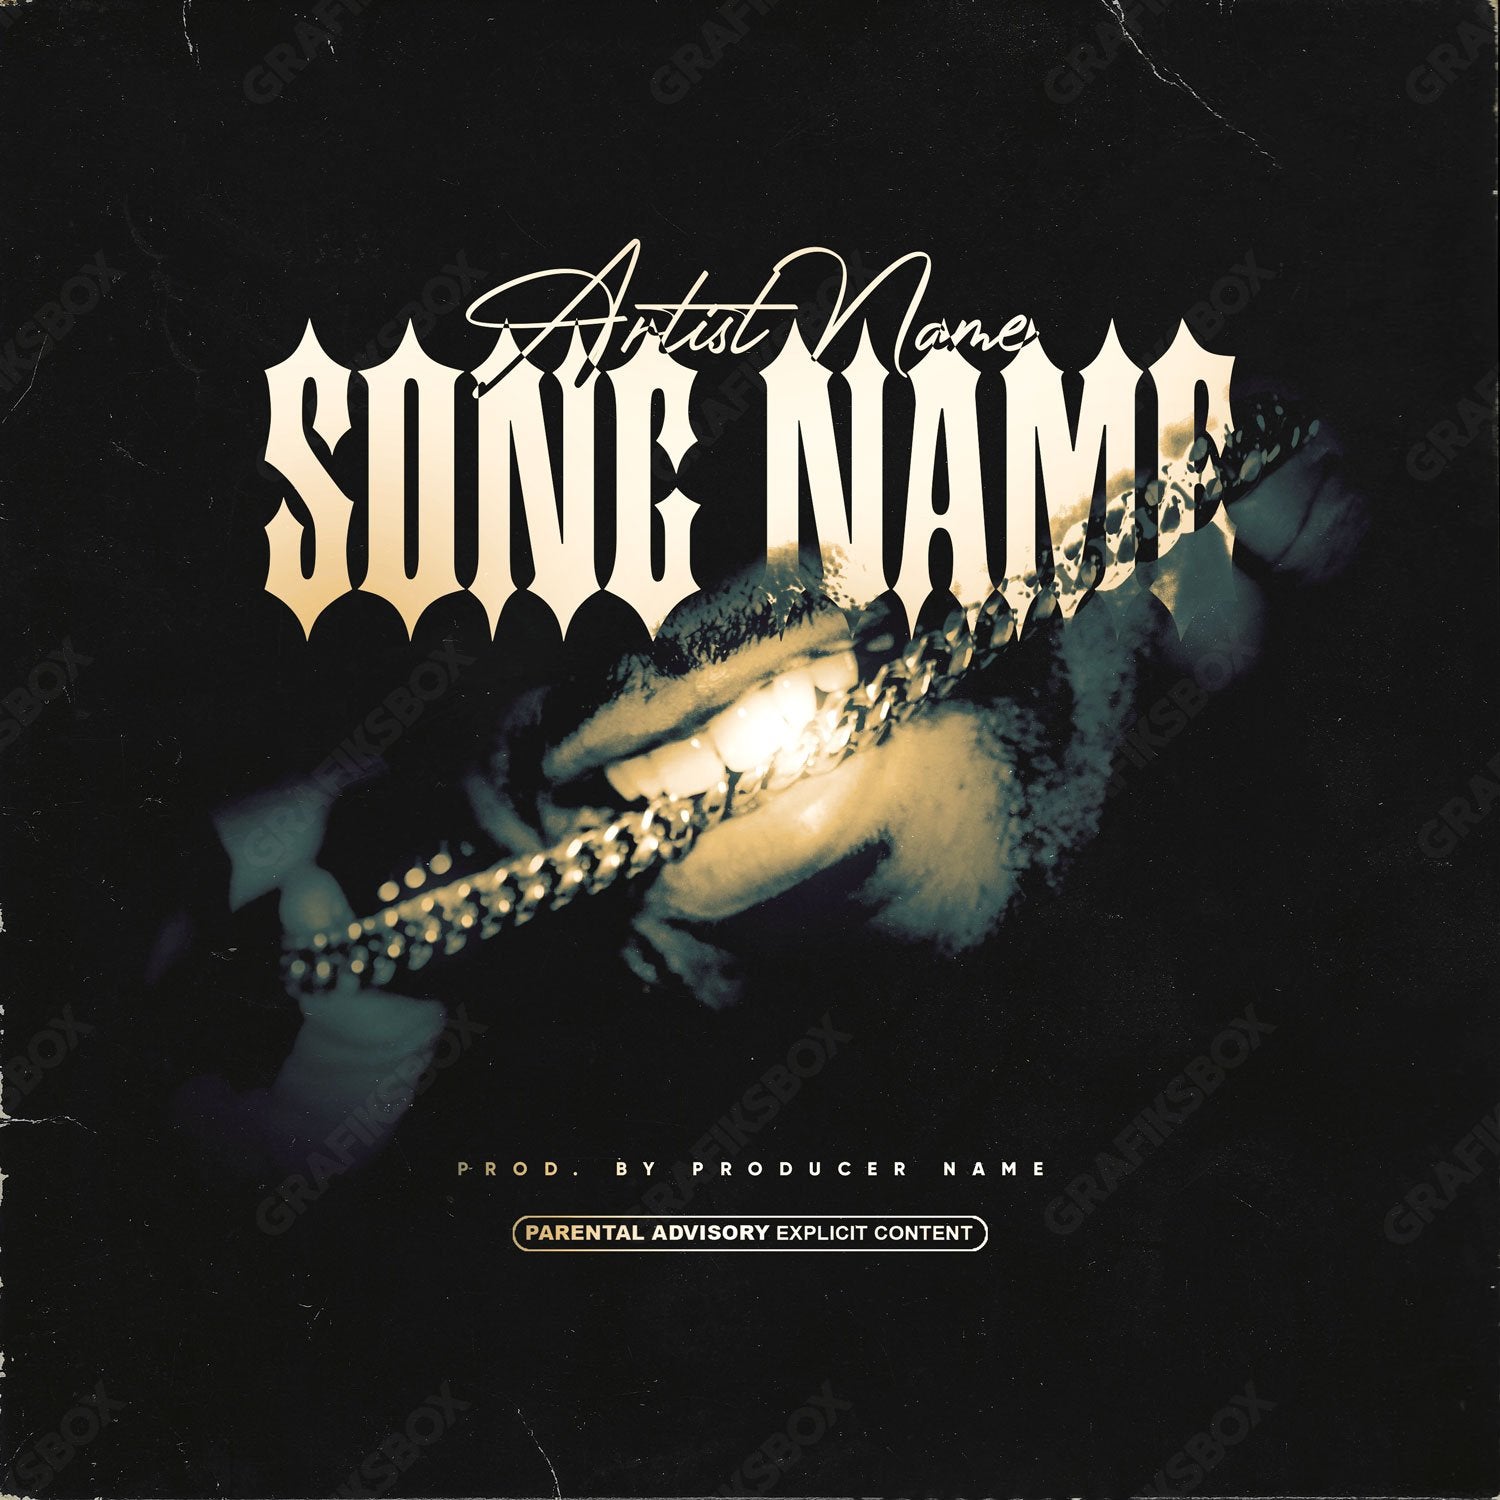 One Chain premade cover art